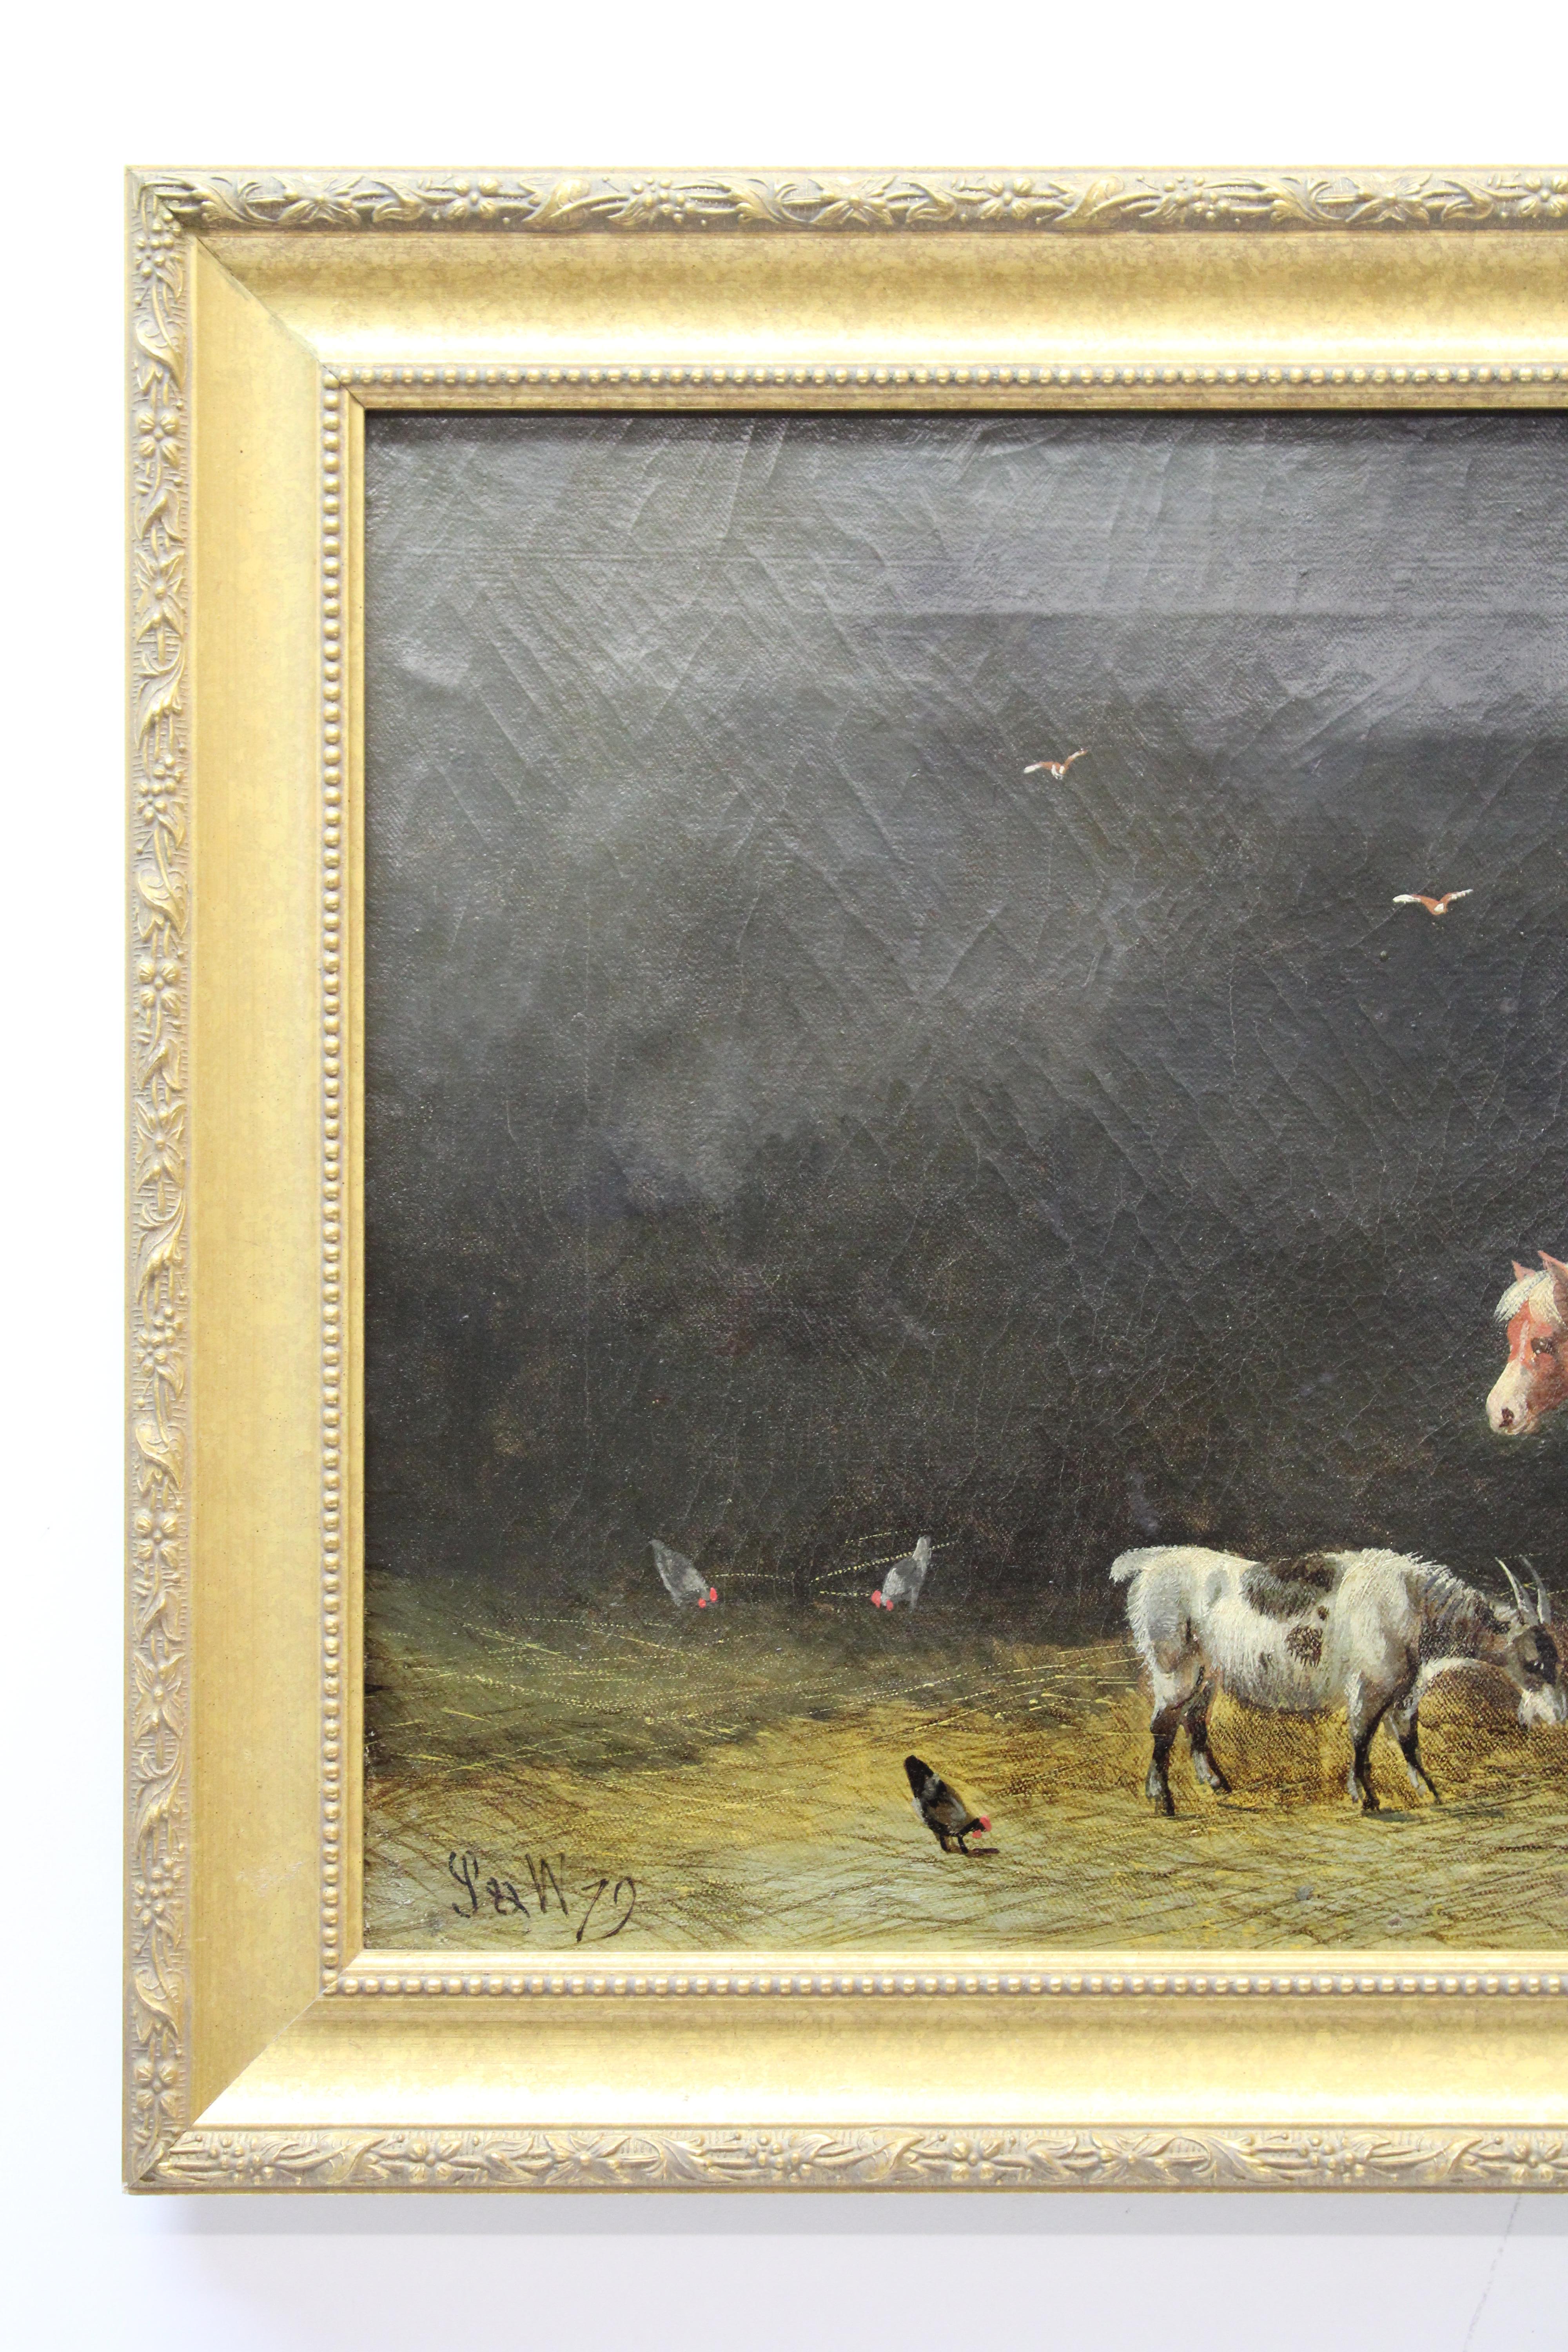 Charming 19th C. barnyard interior scene with your typical barn animals including horses, a goat, and a few hens.  Signed lower right with monogram and dated '79 (1879).  Artist possibly John Alfred Wheeler.

Painting dimensions: 14